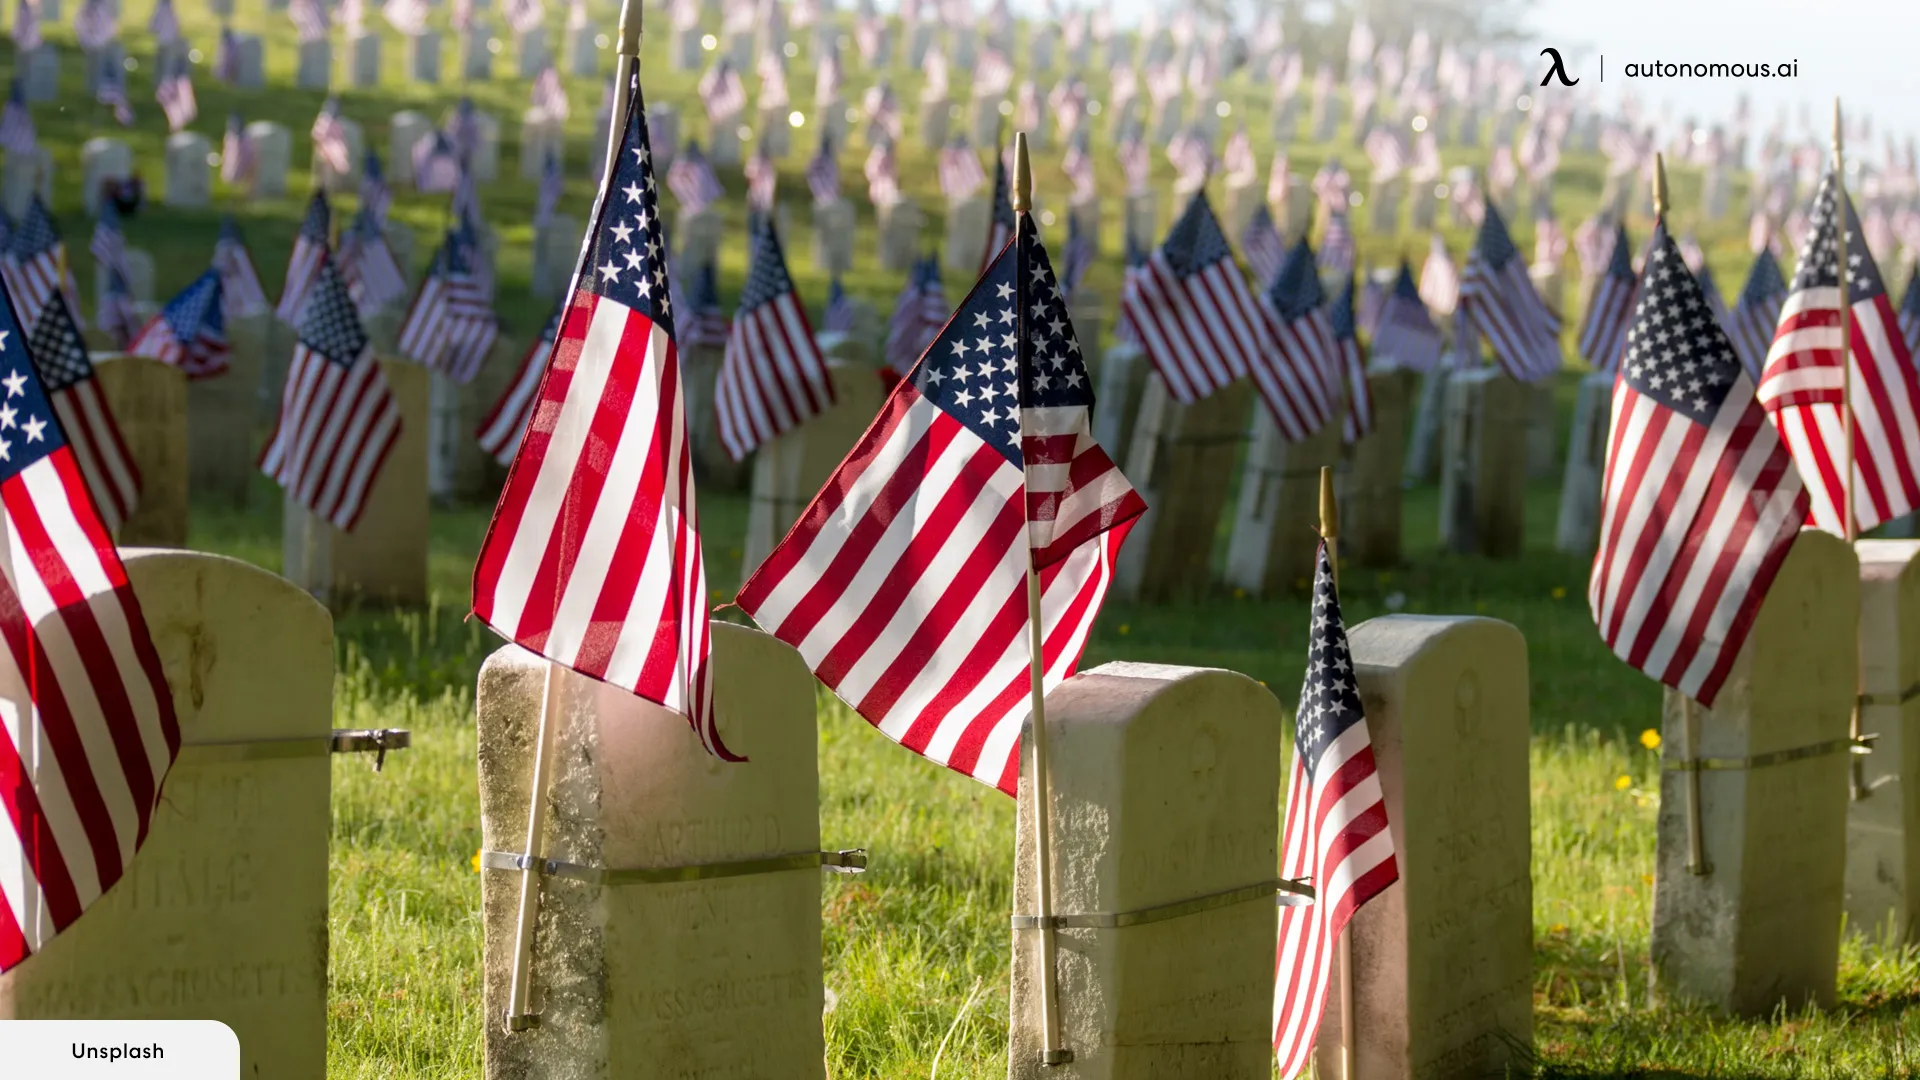 Attend a Local Ceremony - Memorial day activities